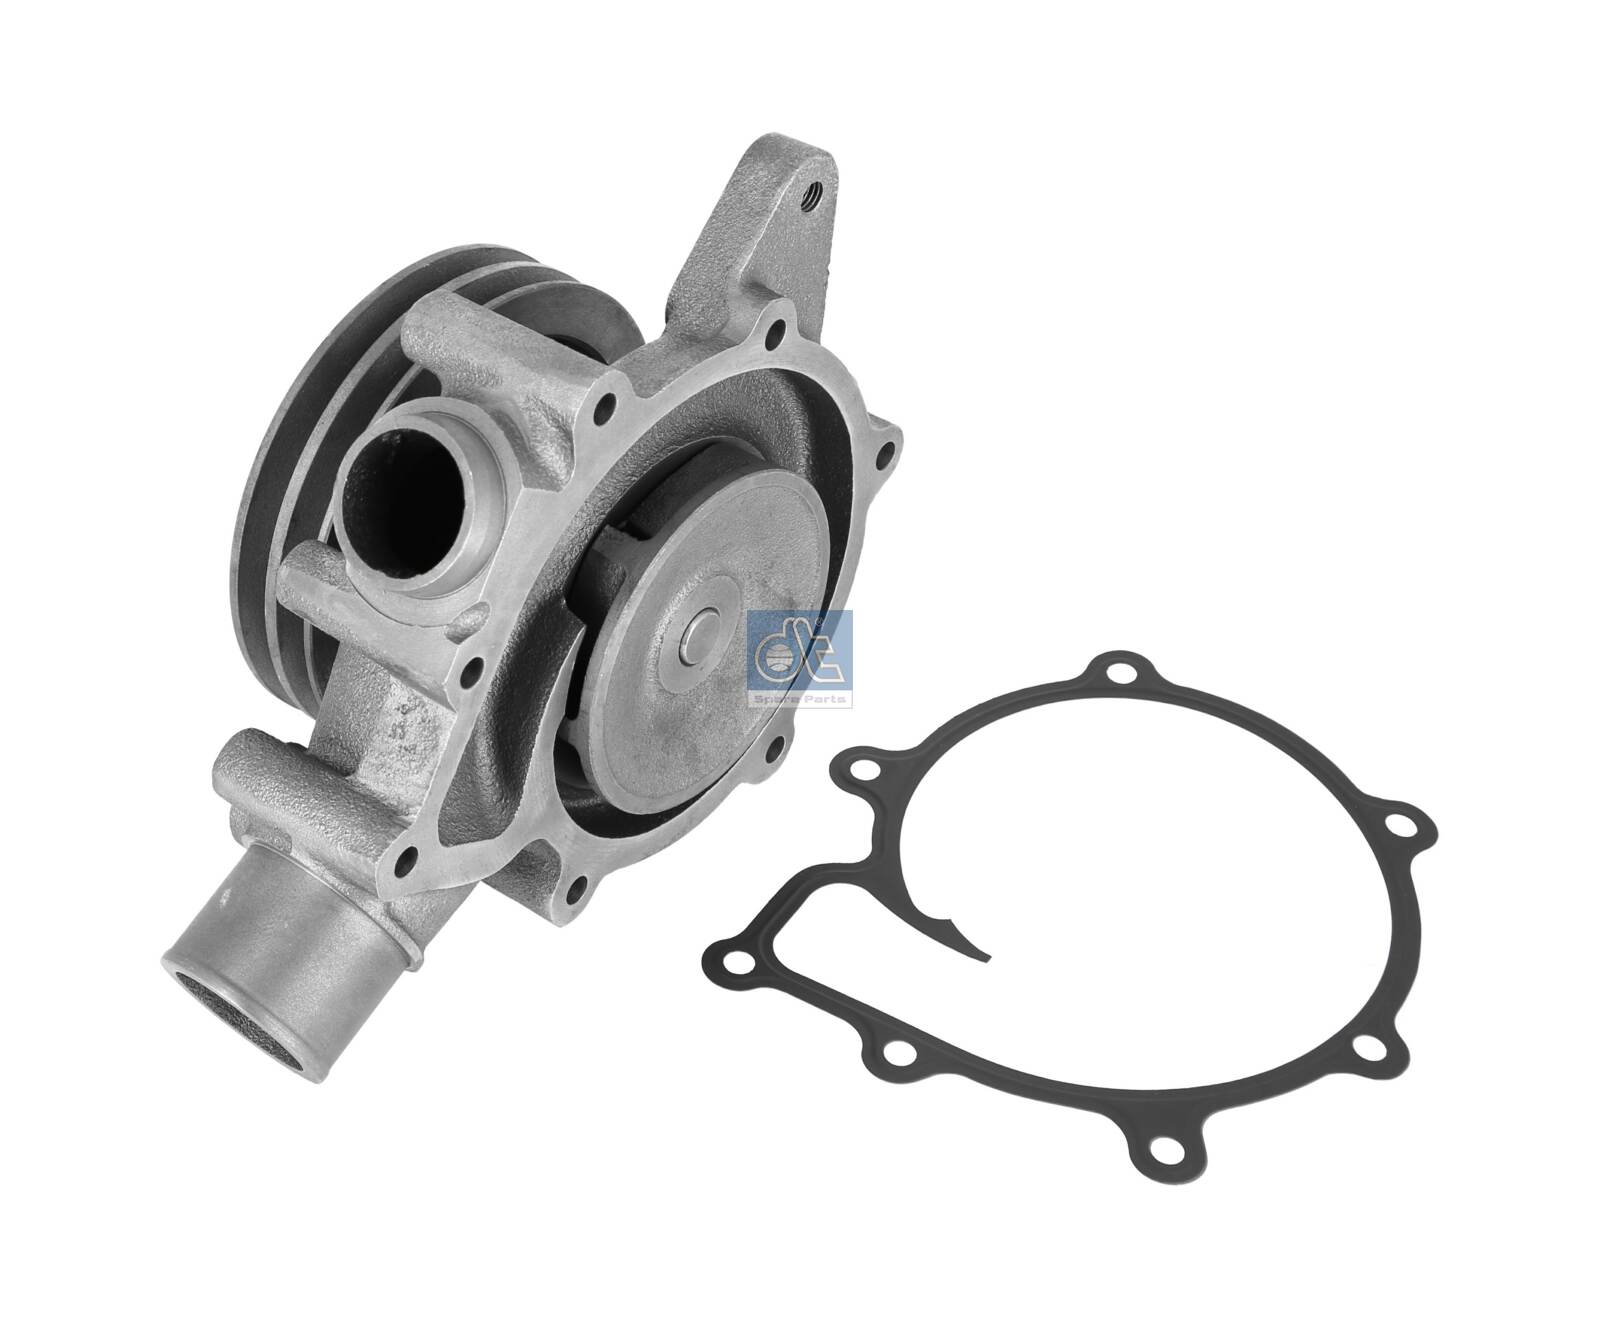 6.30012, Water Pump, engine cooling, DT Spare Parts, 5001865041, 5010450892, 7422485206, 078.124, 082000040226, 16-332200003, 2201151, 24-1390, 250.038-00A, 33196, 78200113, 8MP376808-474, CP483000S, DP784